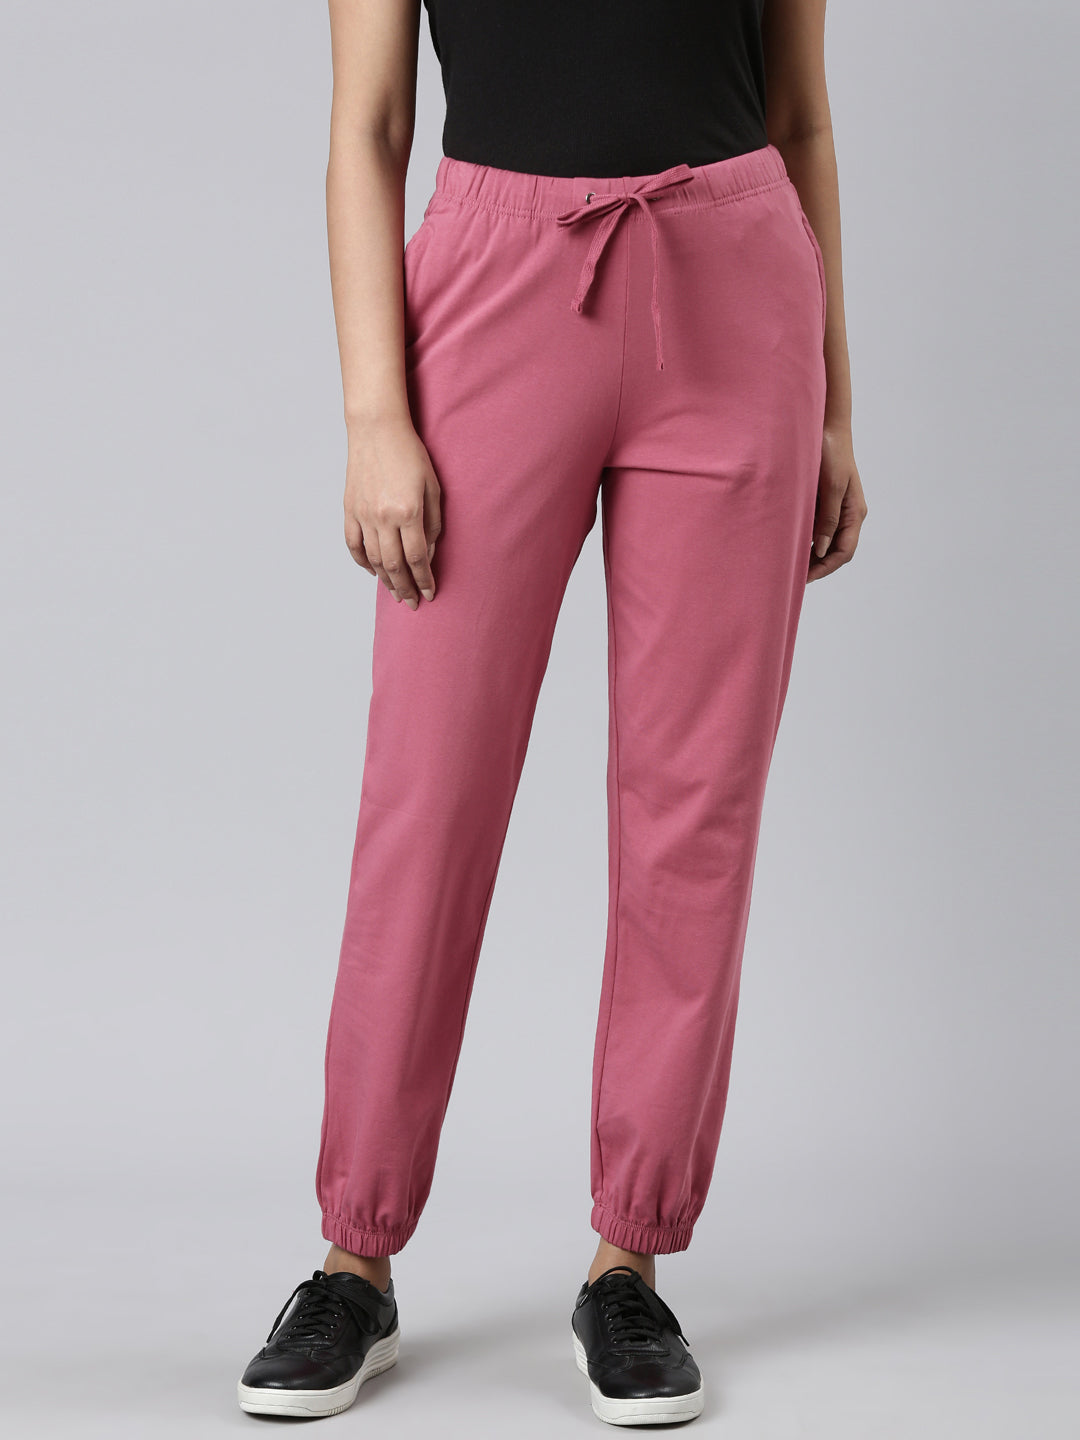 Instant Message - Its Always Wine O'Clock - Ladies Jogger Pant 